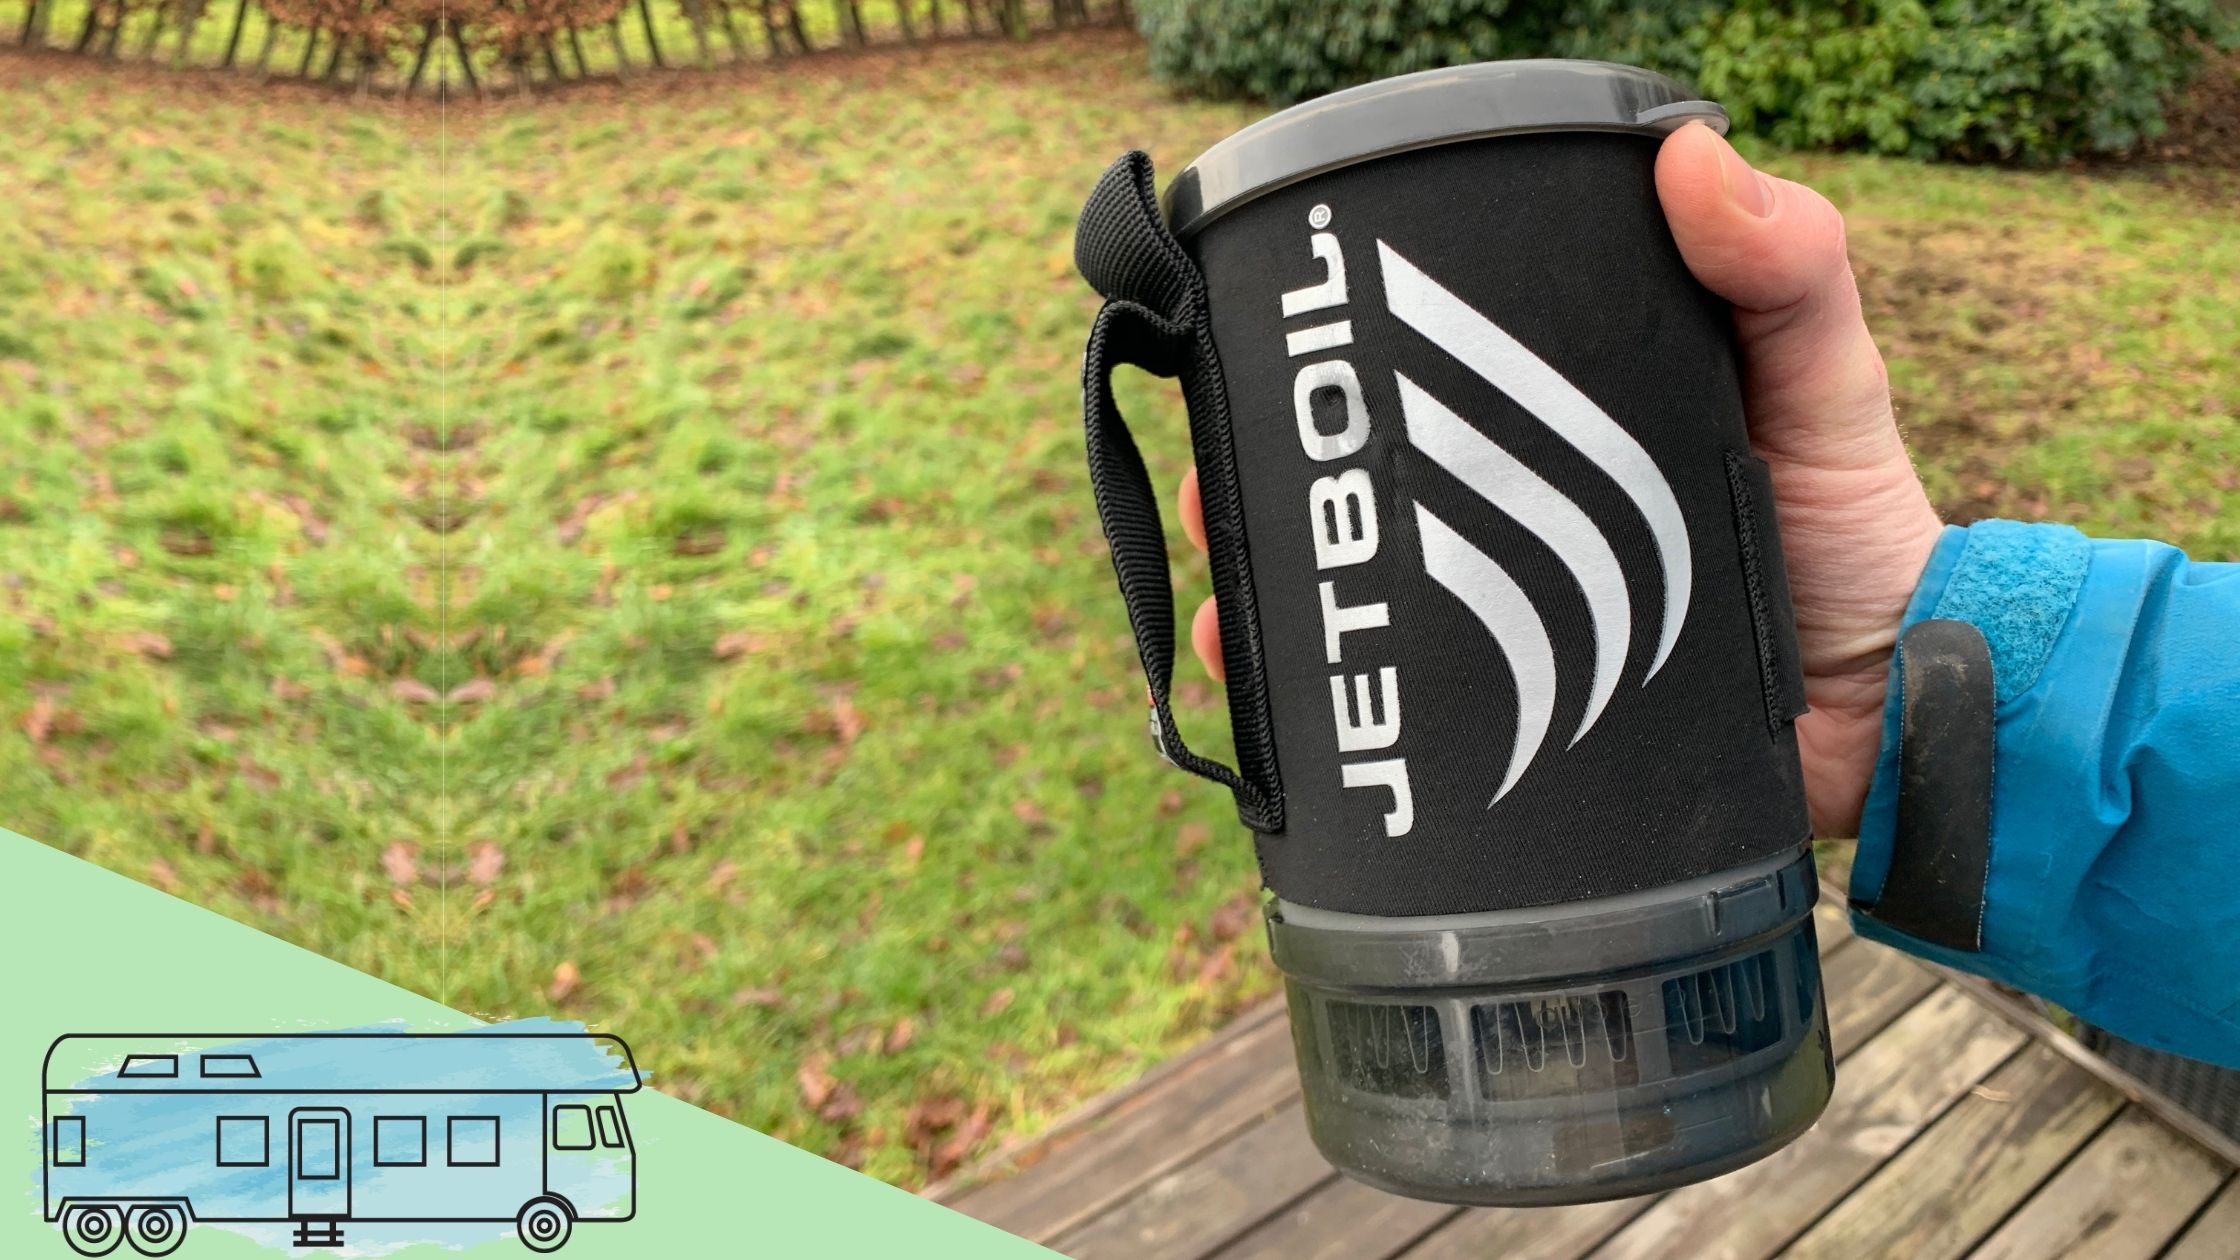 A Jetboil camping stove in my hand